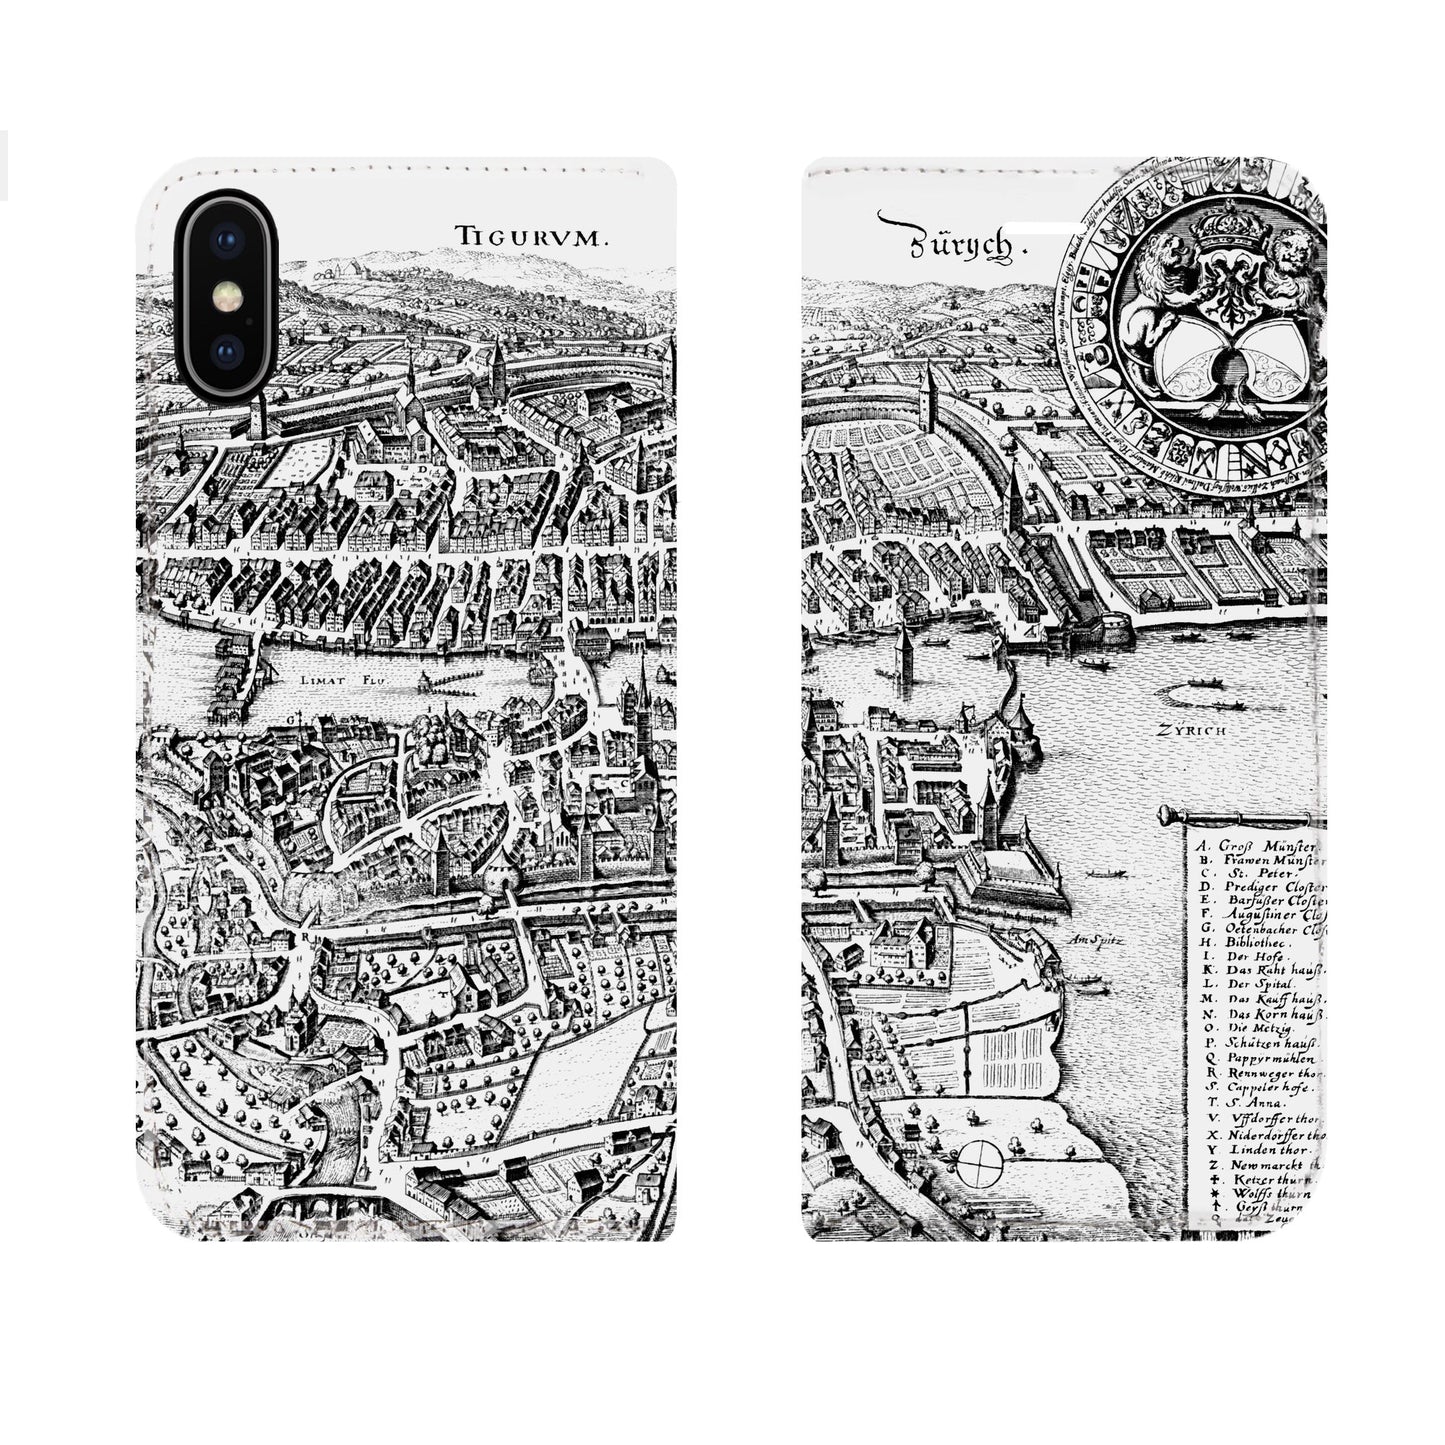 Zurich Merian Panorama Case for iPhone X/XS